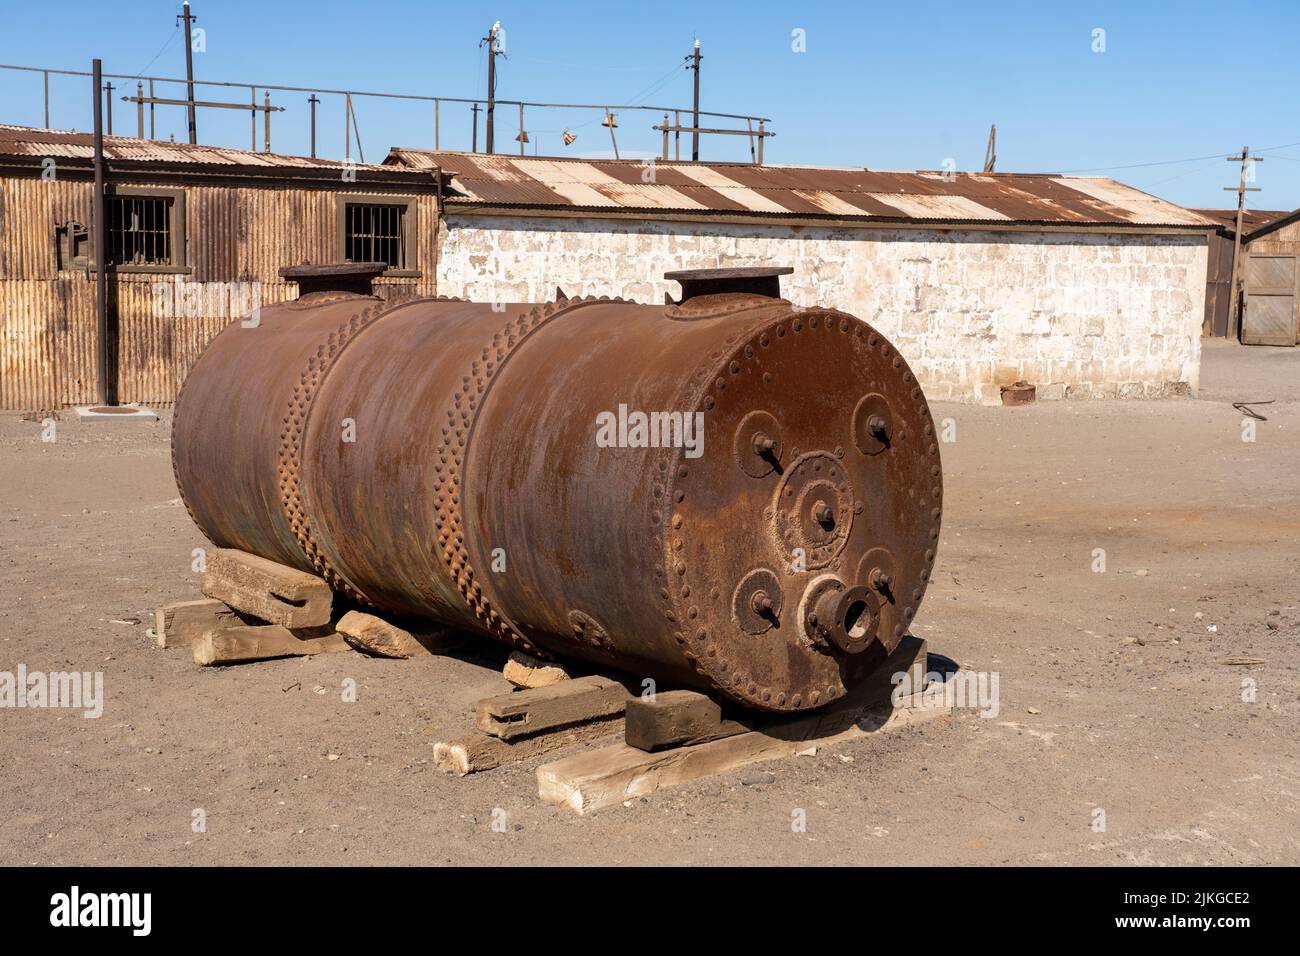 Outdoor museum display of an old steam boiler used in the saltpeter works in Humberstone, Chile. Stock Photo